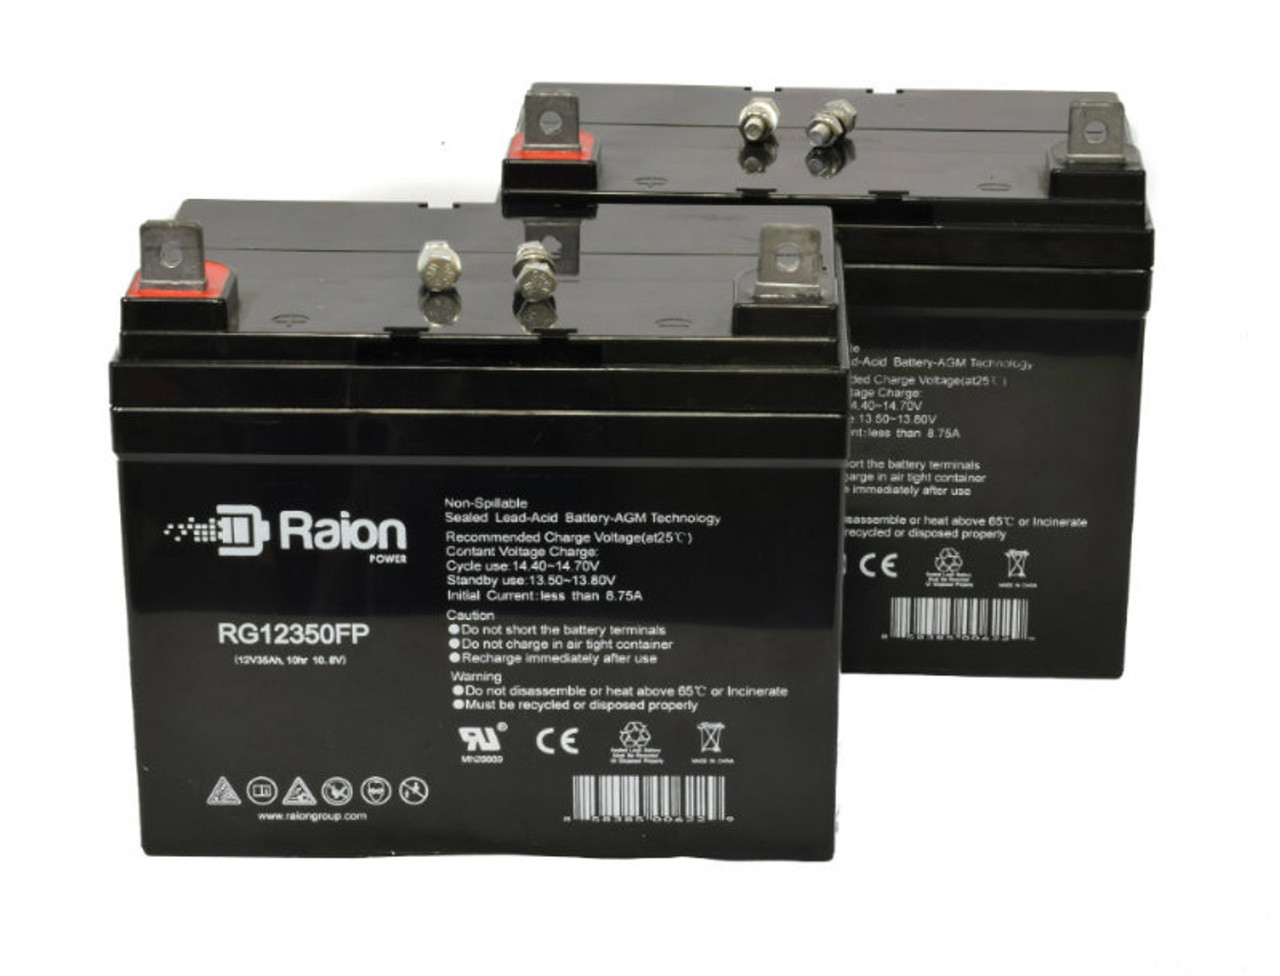 Raion Power Replacement 12V 35Ah Lawn Mower Battery for Black & Decker CMM630 Type 1 - 2 Pack